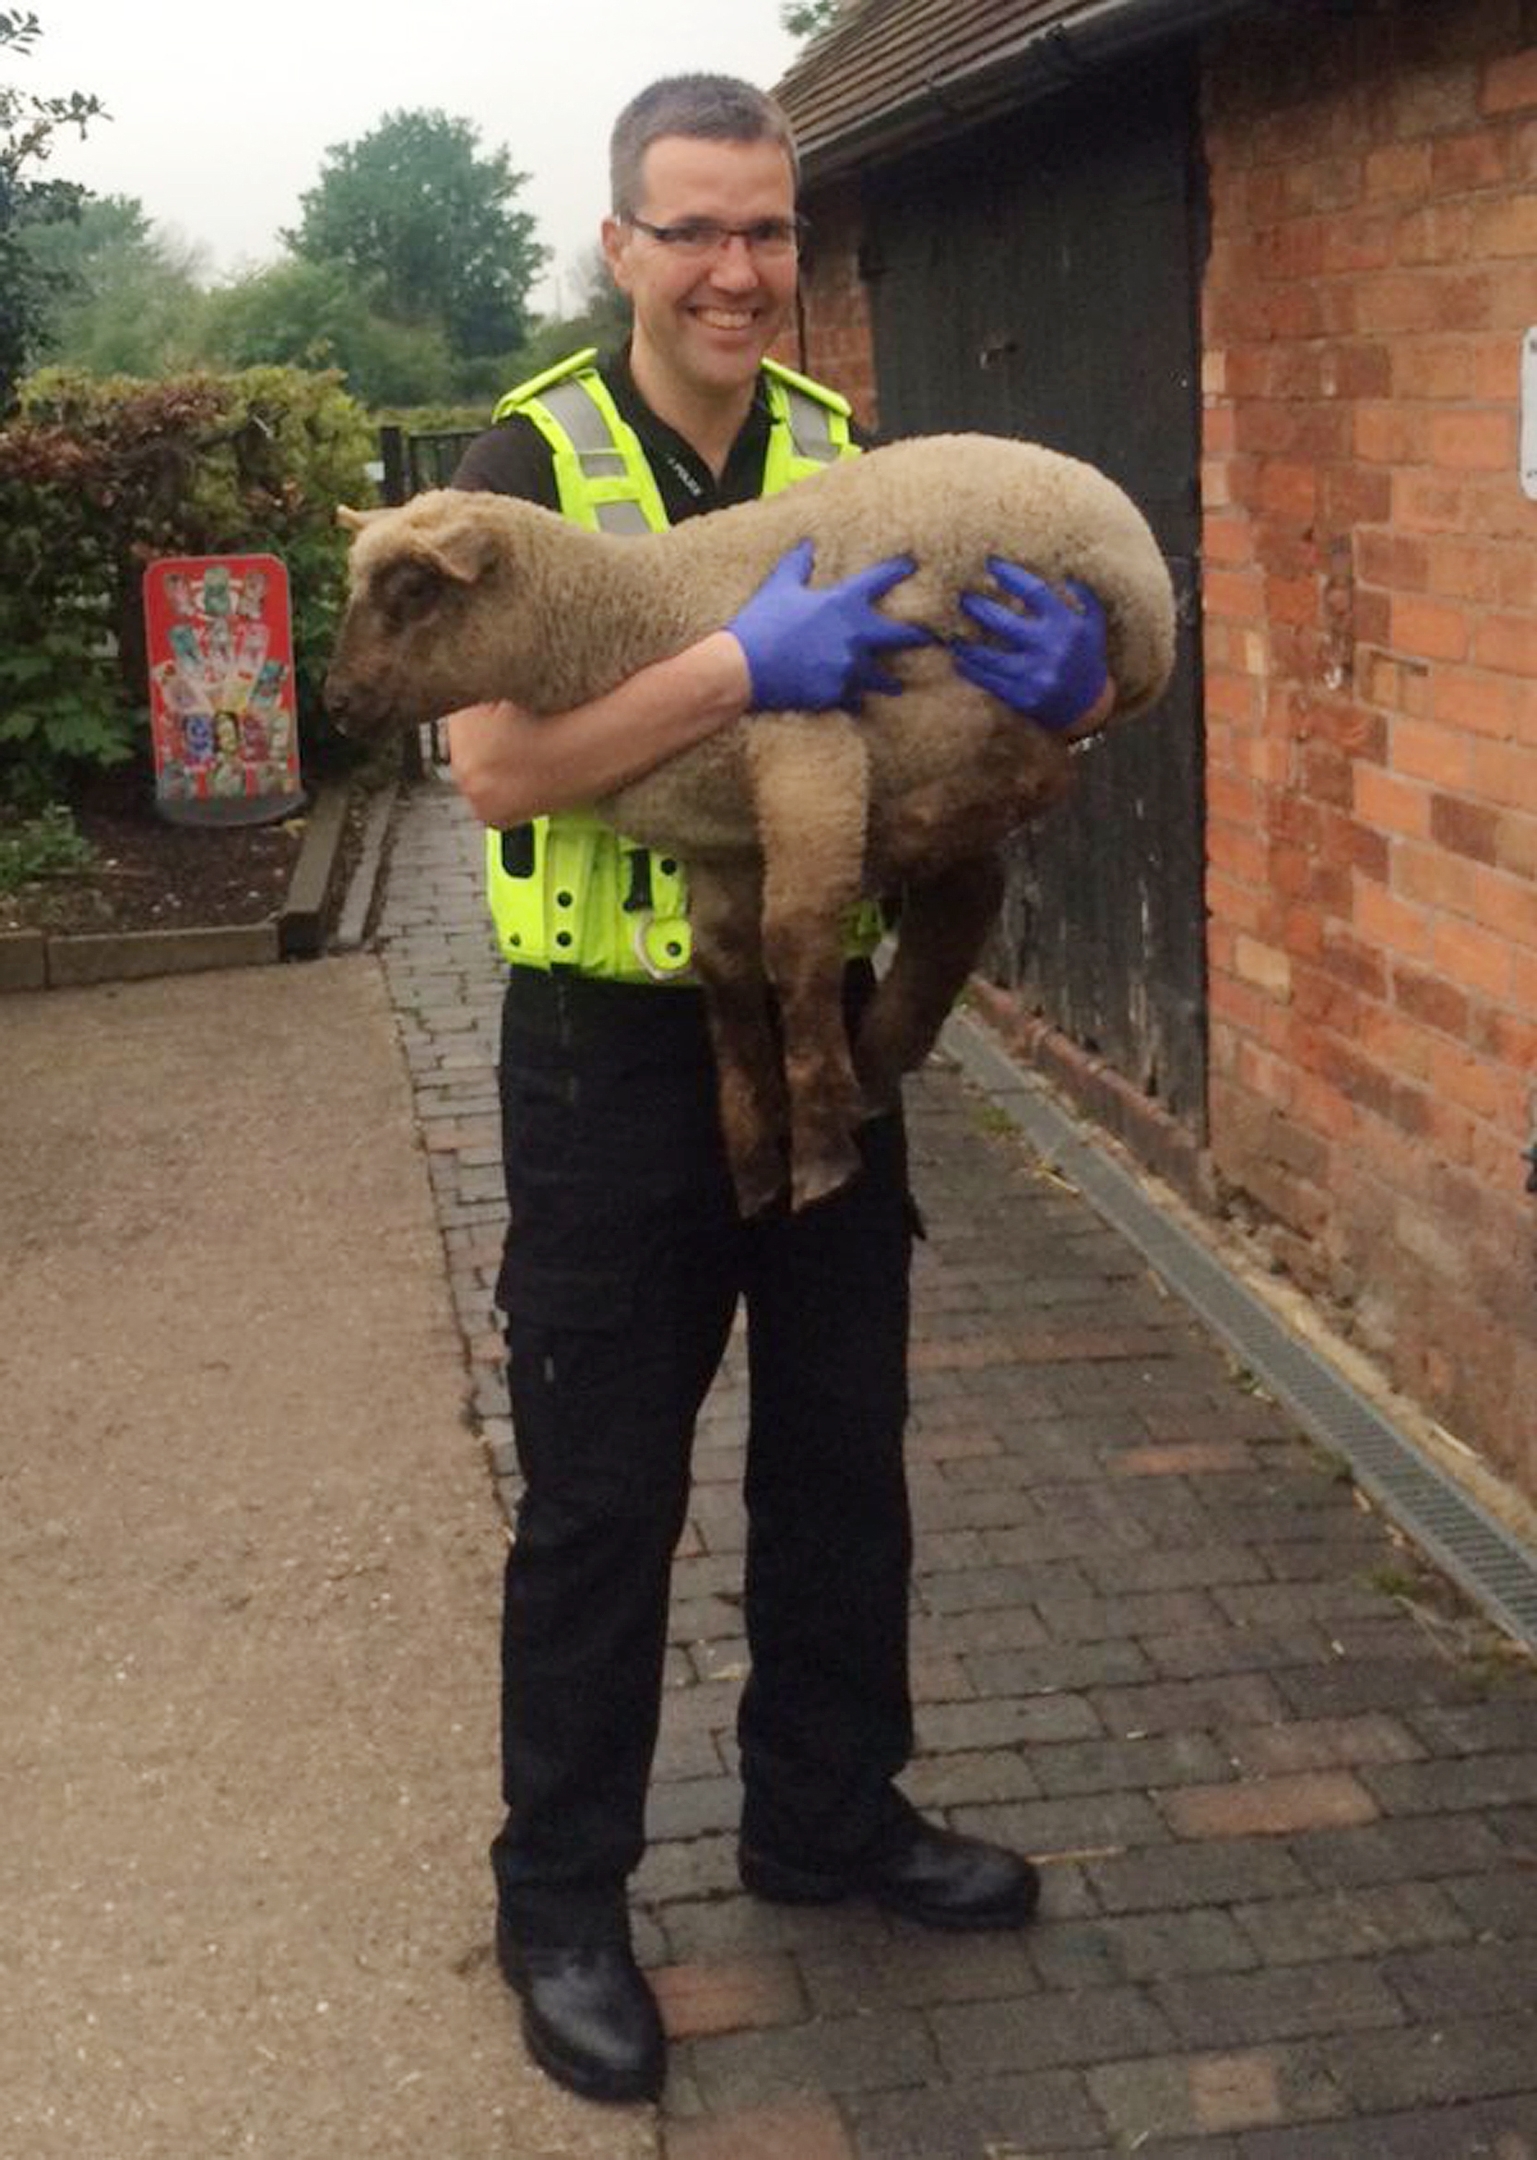 Handout photo issued by West Midlands Police of Inspector Clive Baynton with one of three lambs